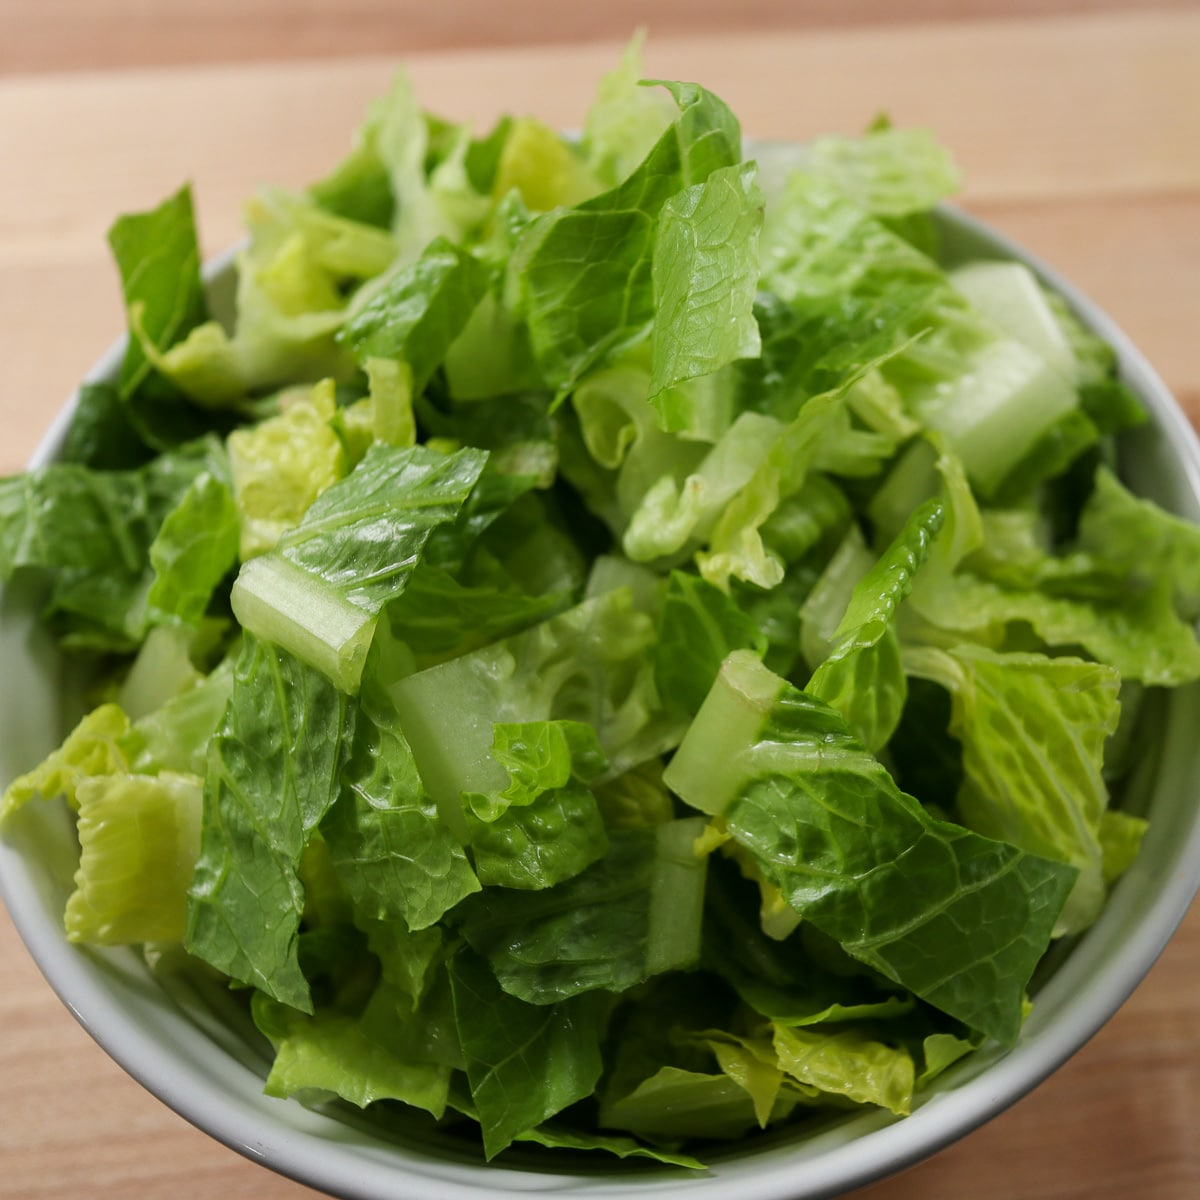 How To Store Chopped Romaine Lettuce